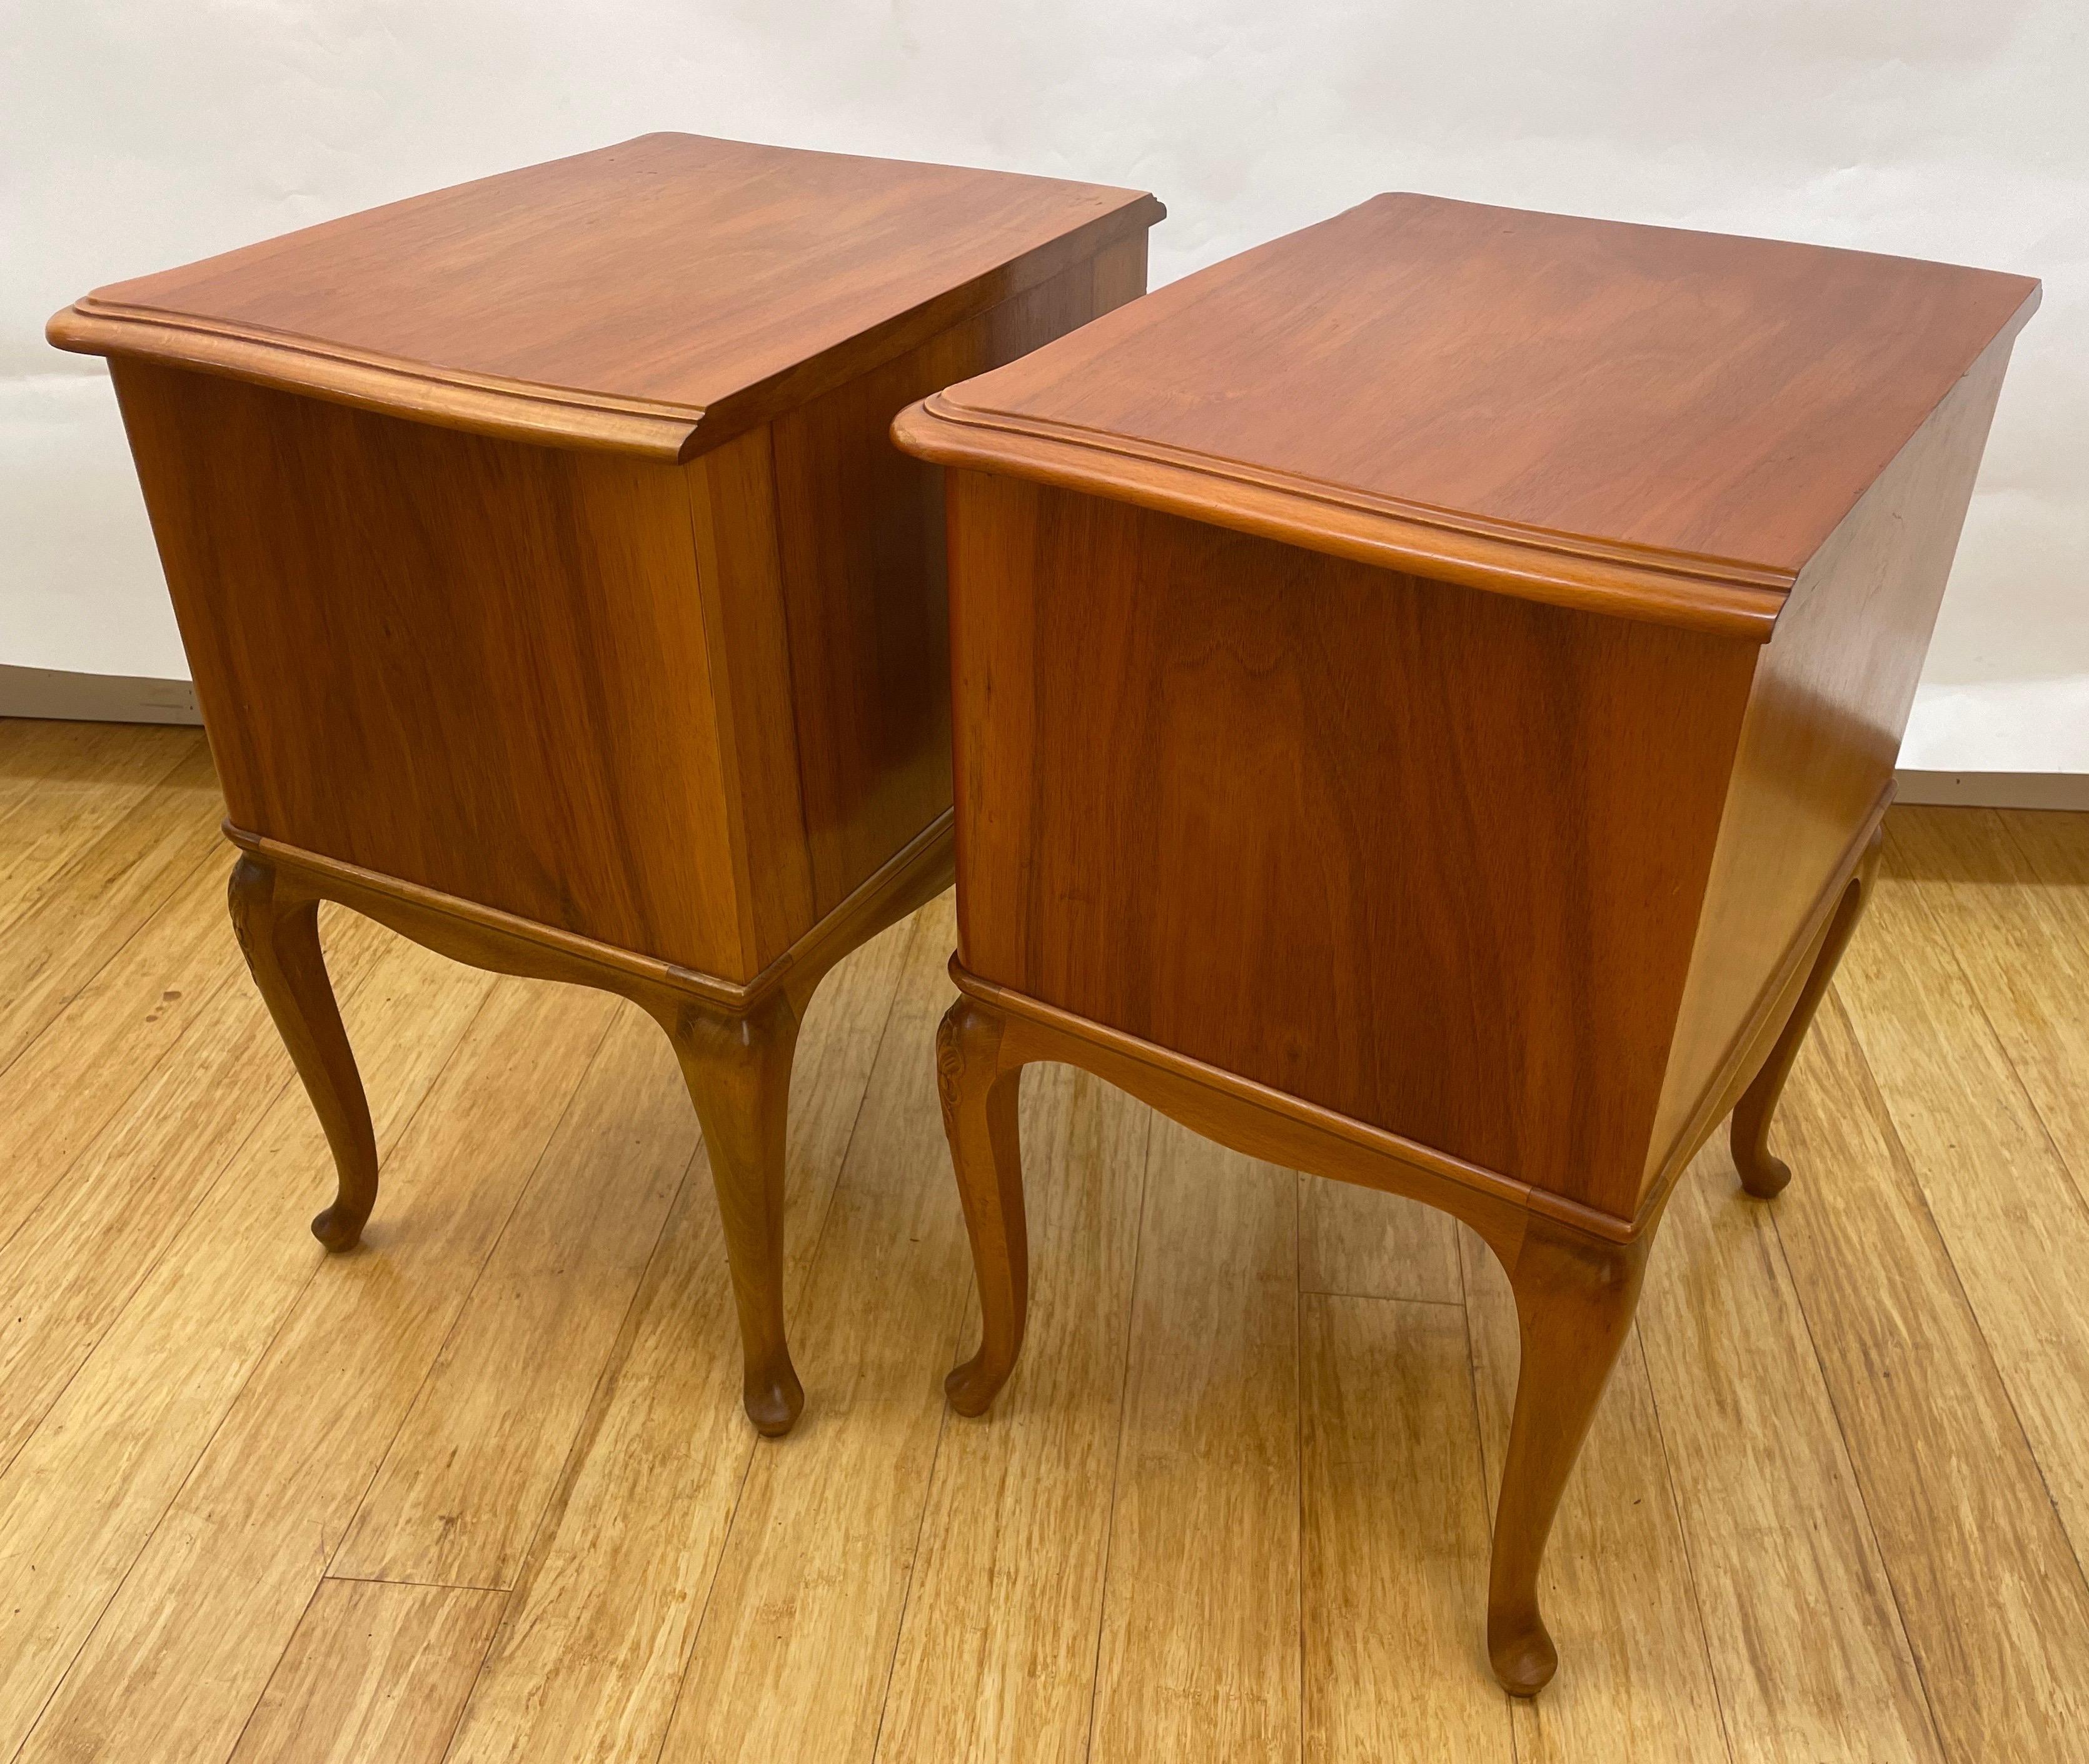 Neoclassical Revival Neoclassical Night Tables For Sale